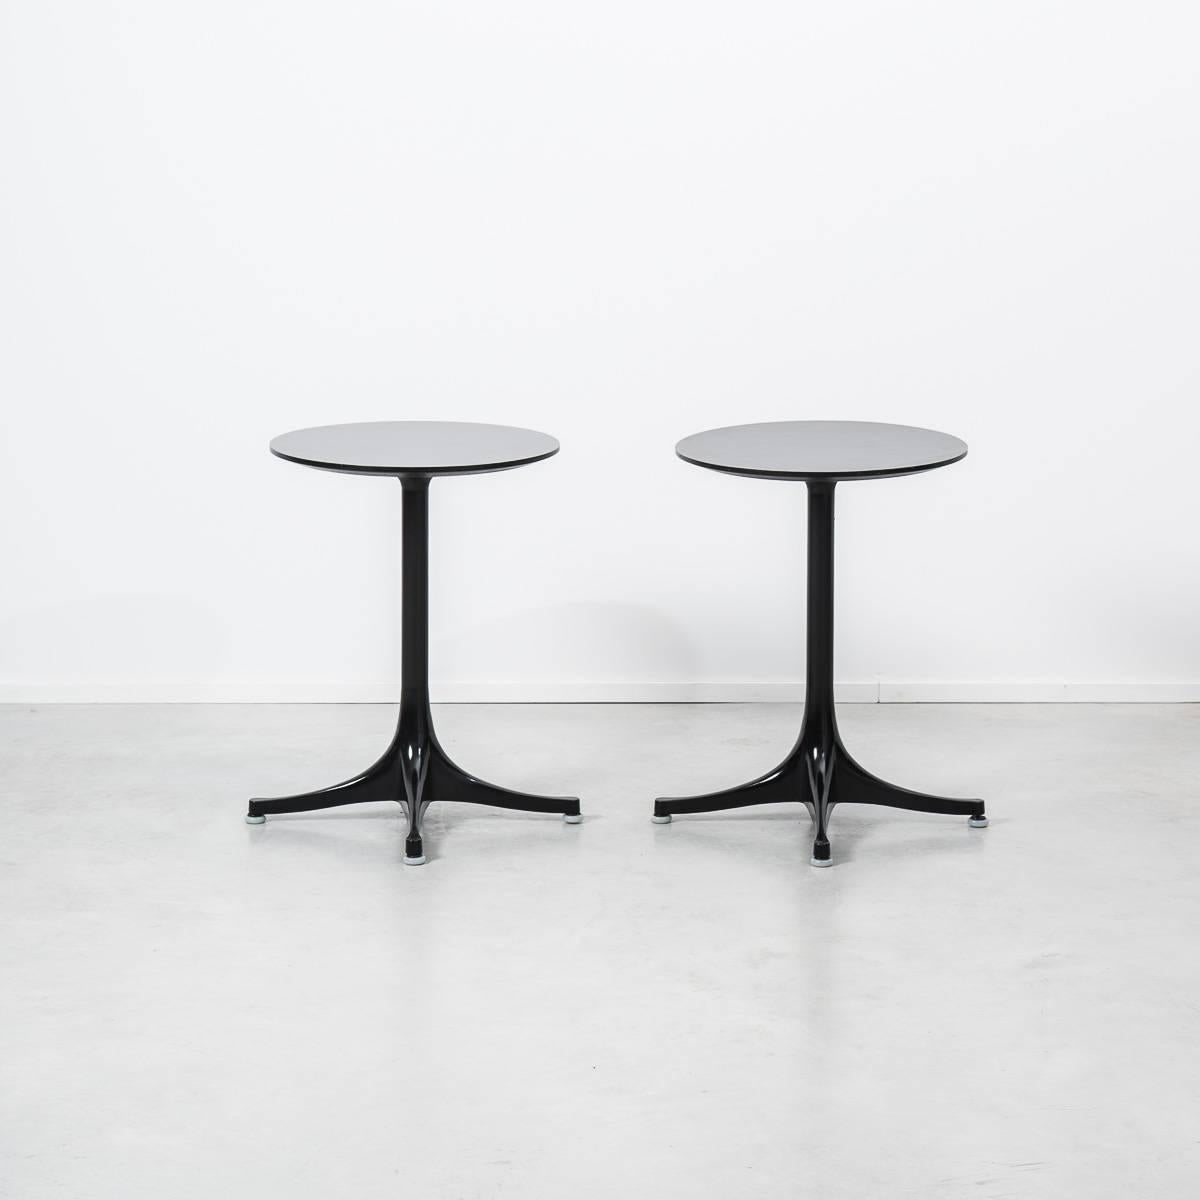 Rare pair of original 5451 tables designed by George Nelson for Herman Miller. Hard to come by edition, featuring stained black birch ply rather than laminated tops, with champfered edges. Tubular steel base and supports and legs in die-cast